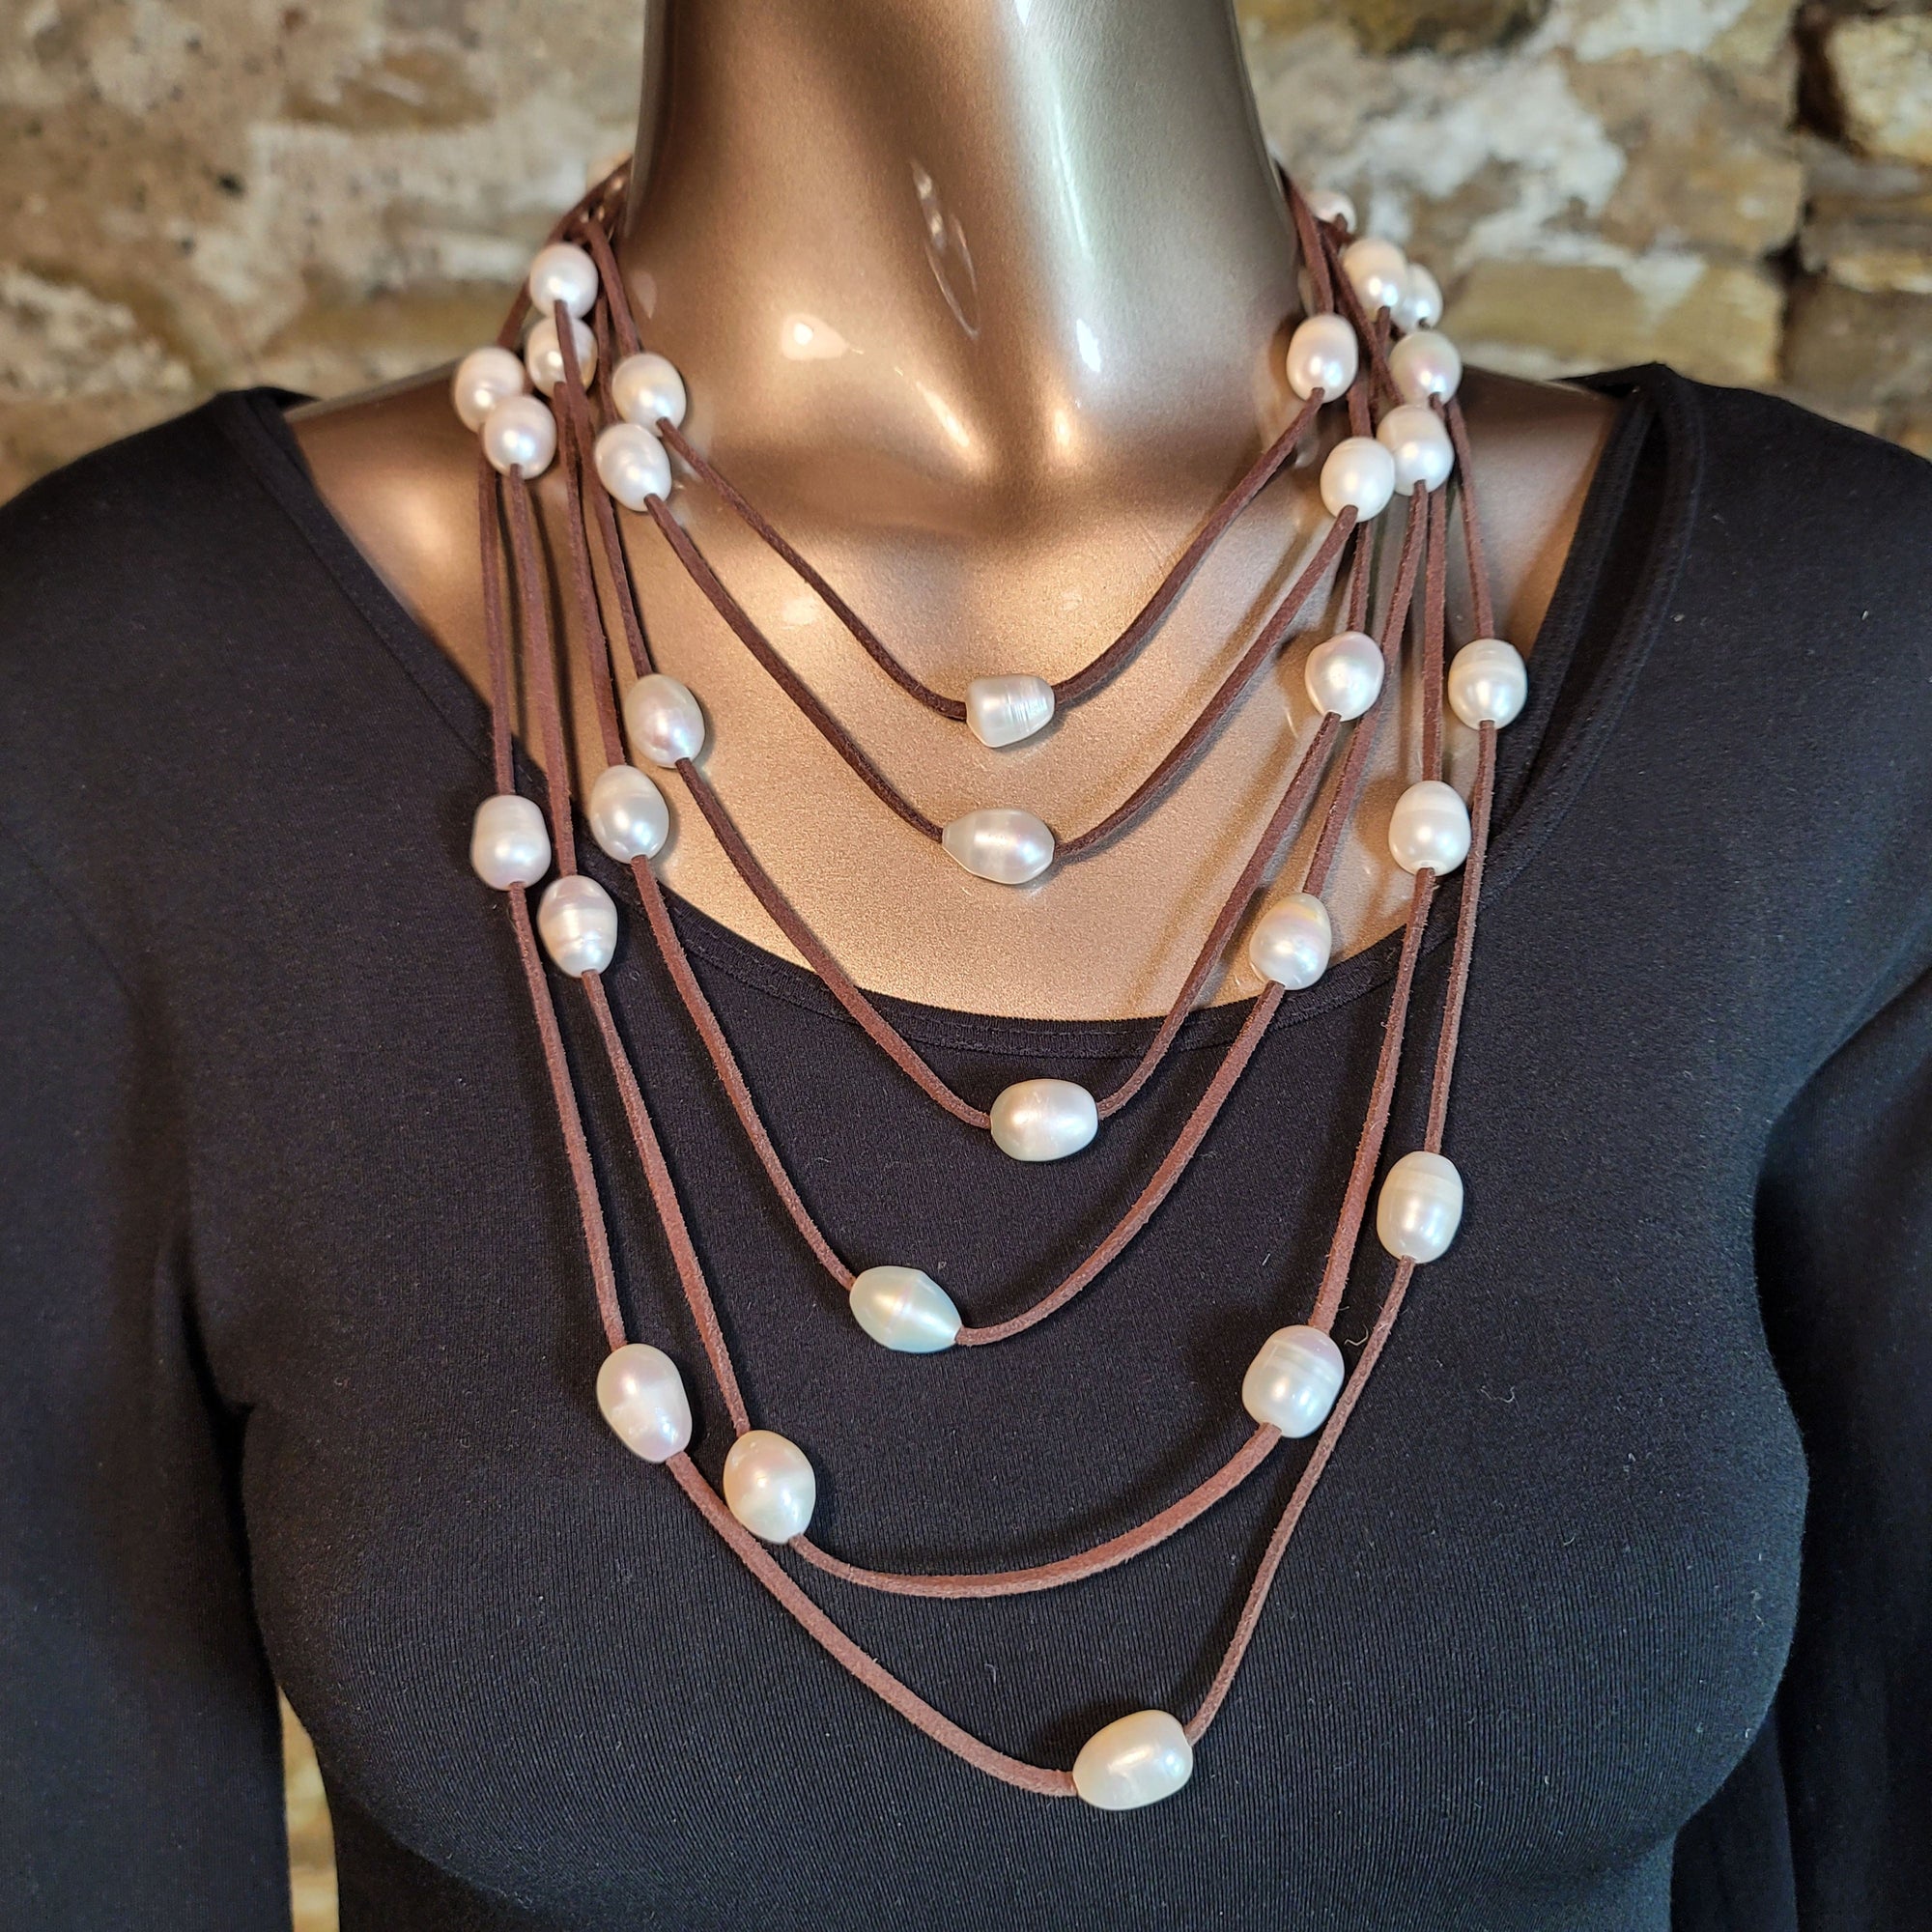 12'-5" Lg. Pearl/Dark Leather Mile Long Wrap Necklace - NPM2